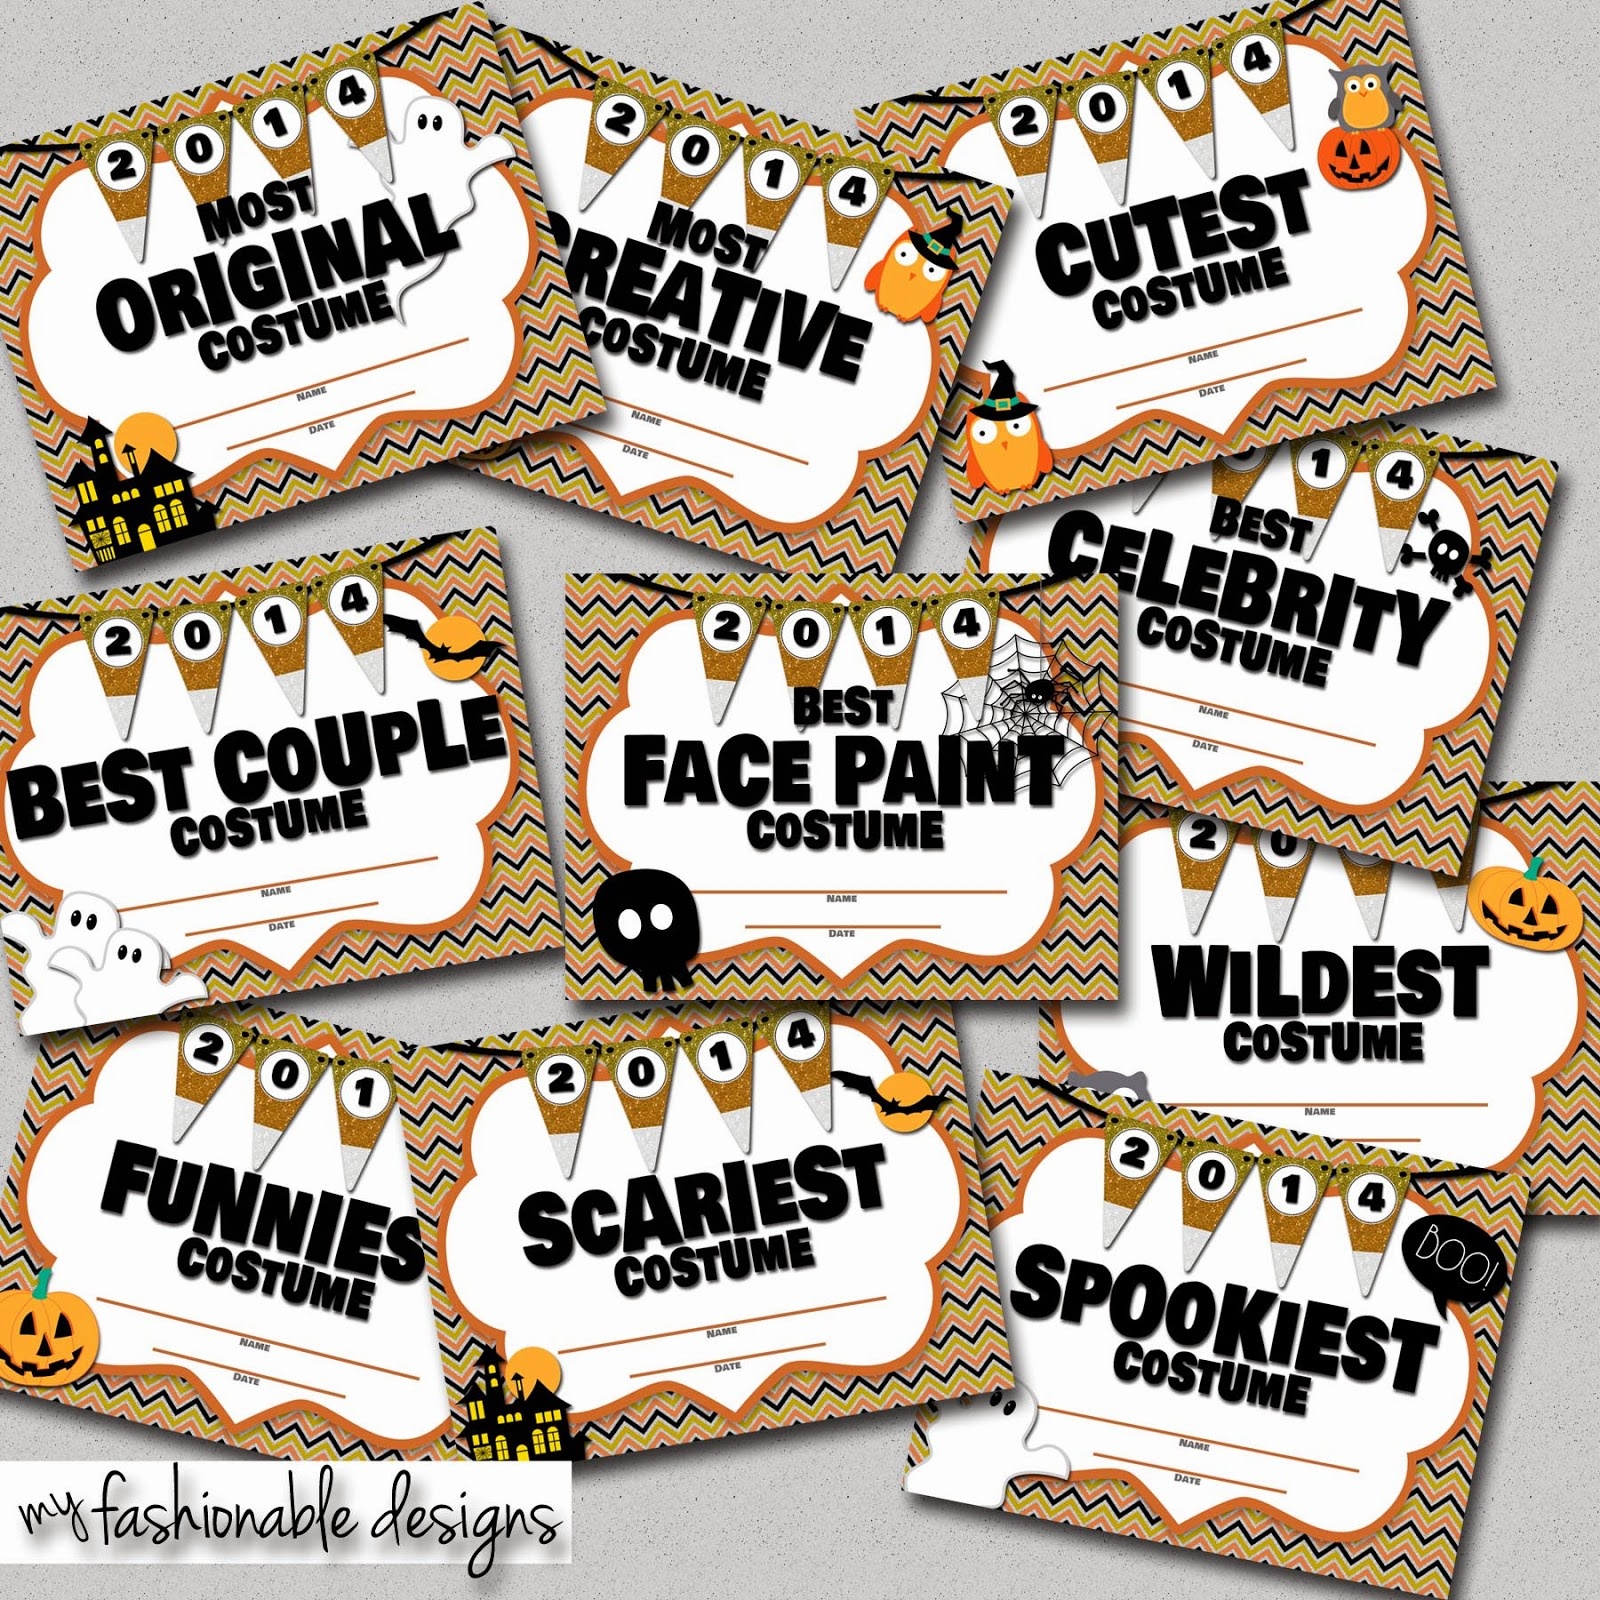 my-fashionable-designs-halloween-costume-contest-certificates-free